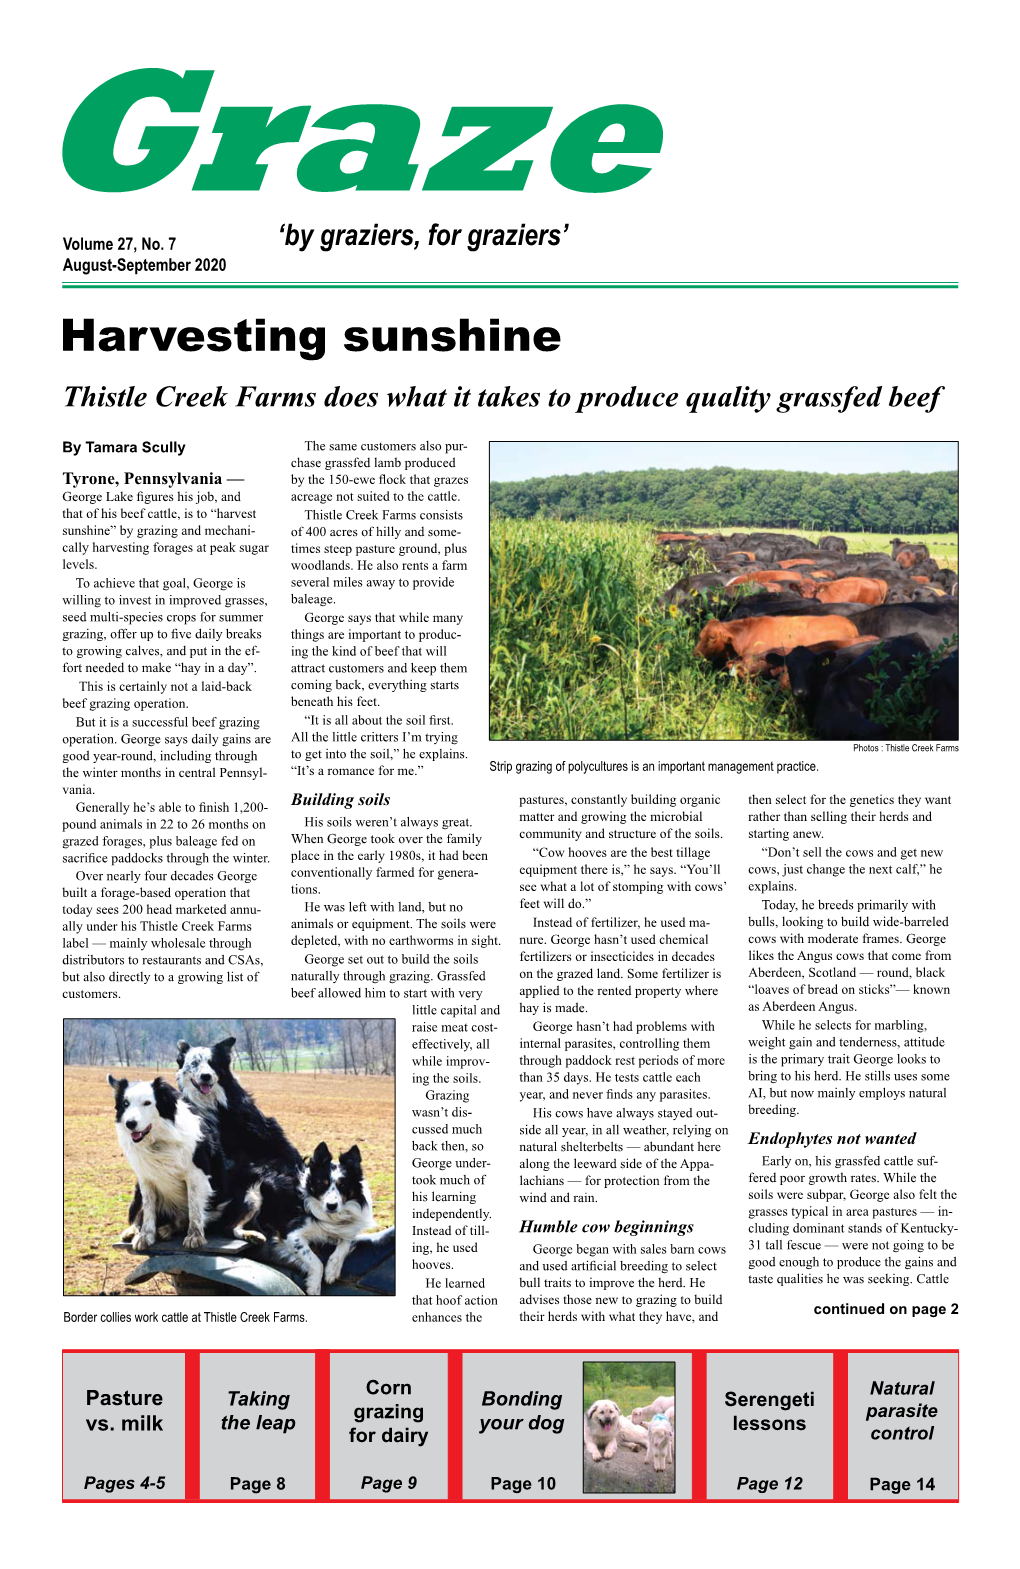 Harvesting Sunshine Thistle Creek Farms Does What It Takes to Produce Quality Grassfed Beef